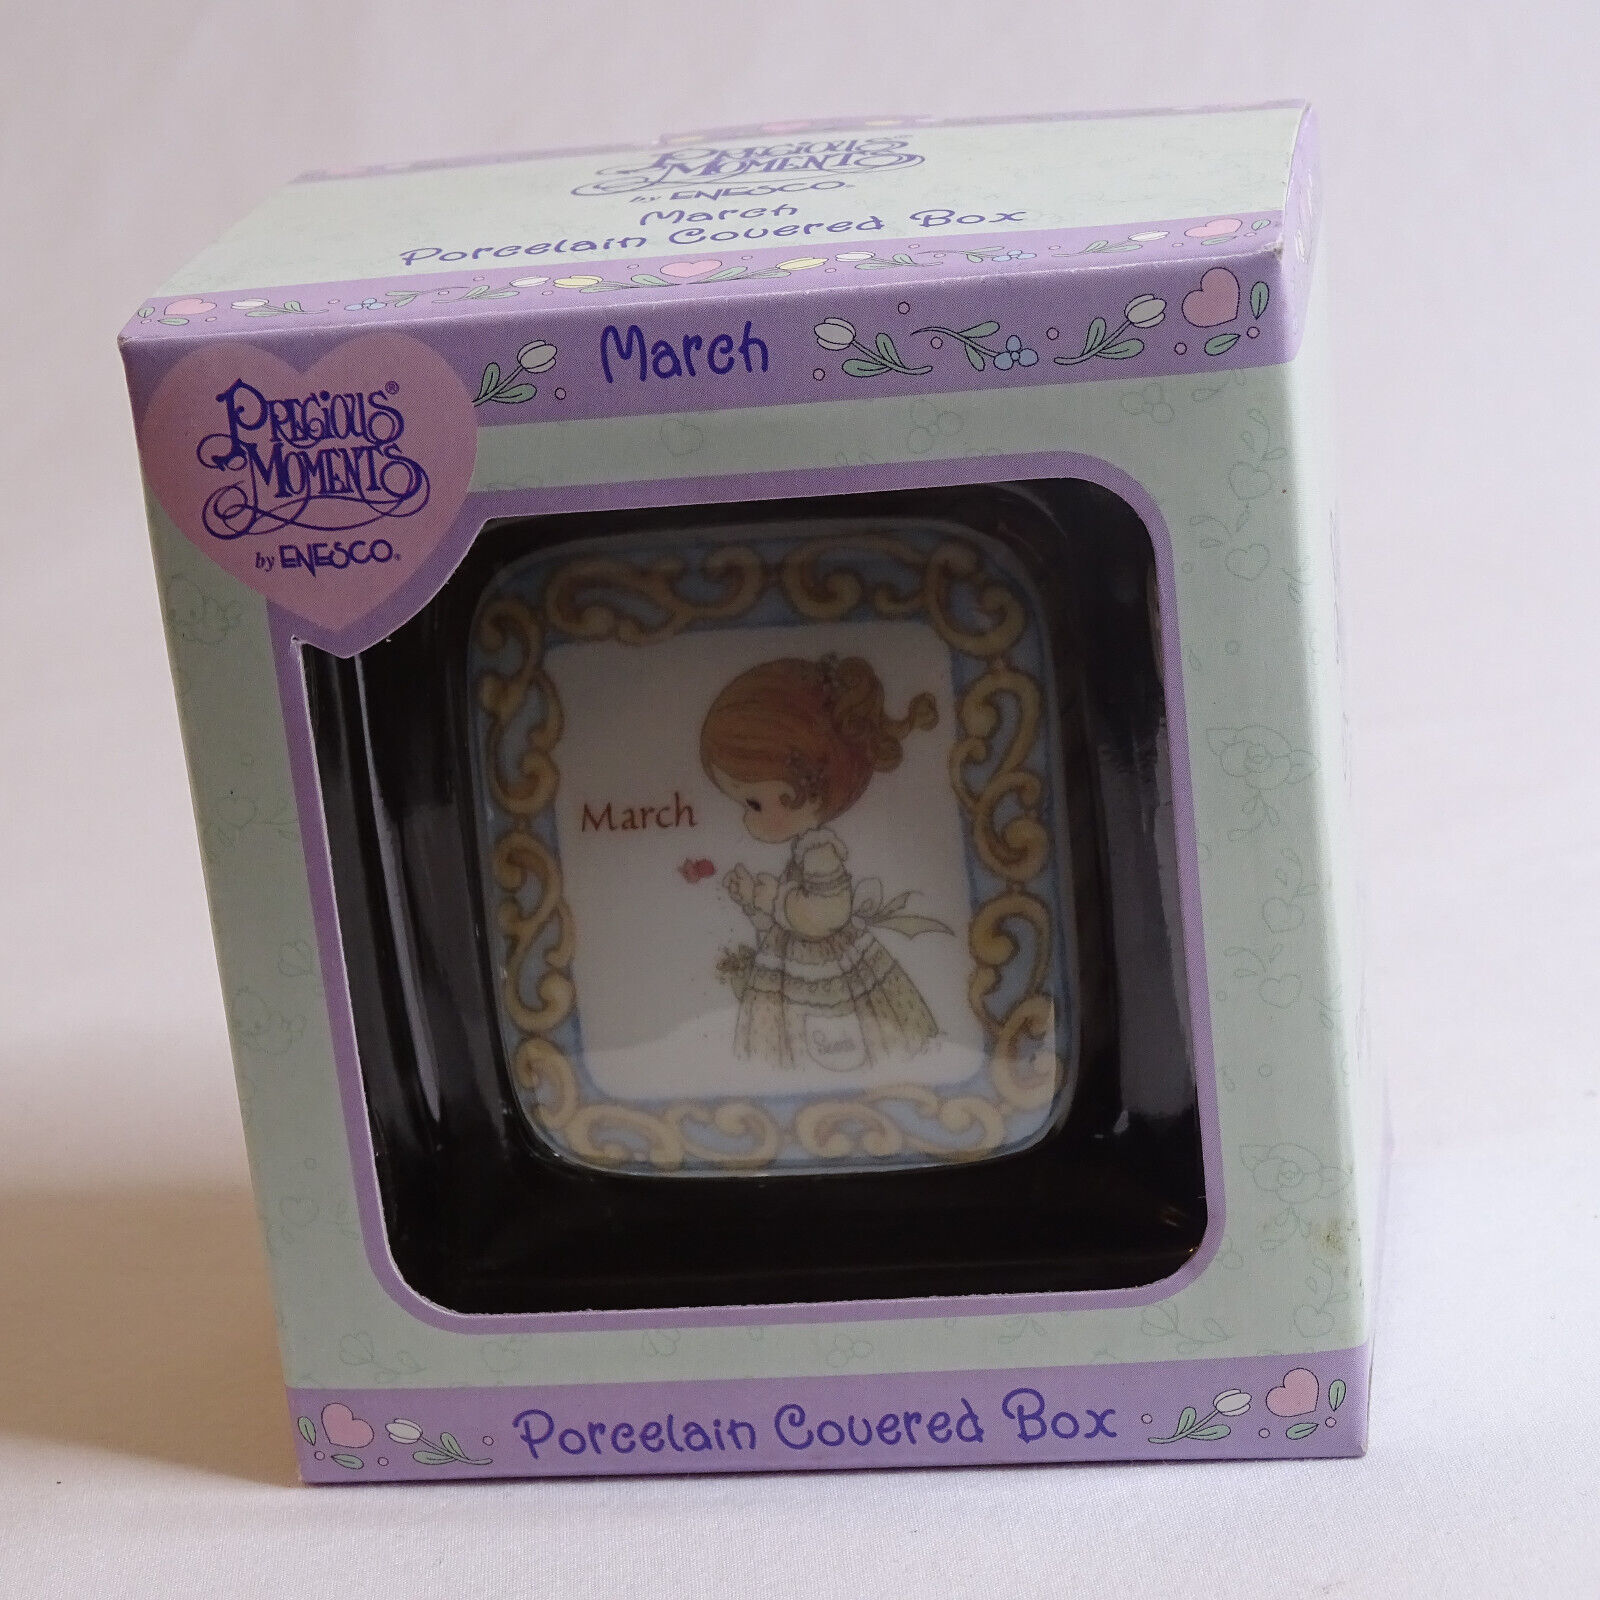 NEW Precious Moments March Month Porcelain Covered Box 2000 Enesco Trinket Box  - $8.33